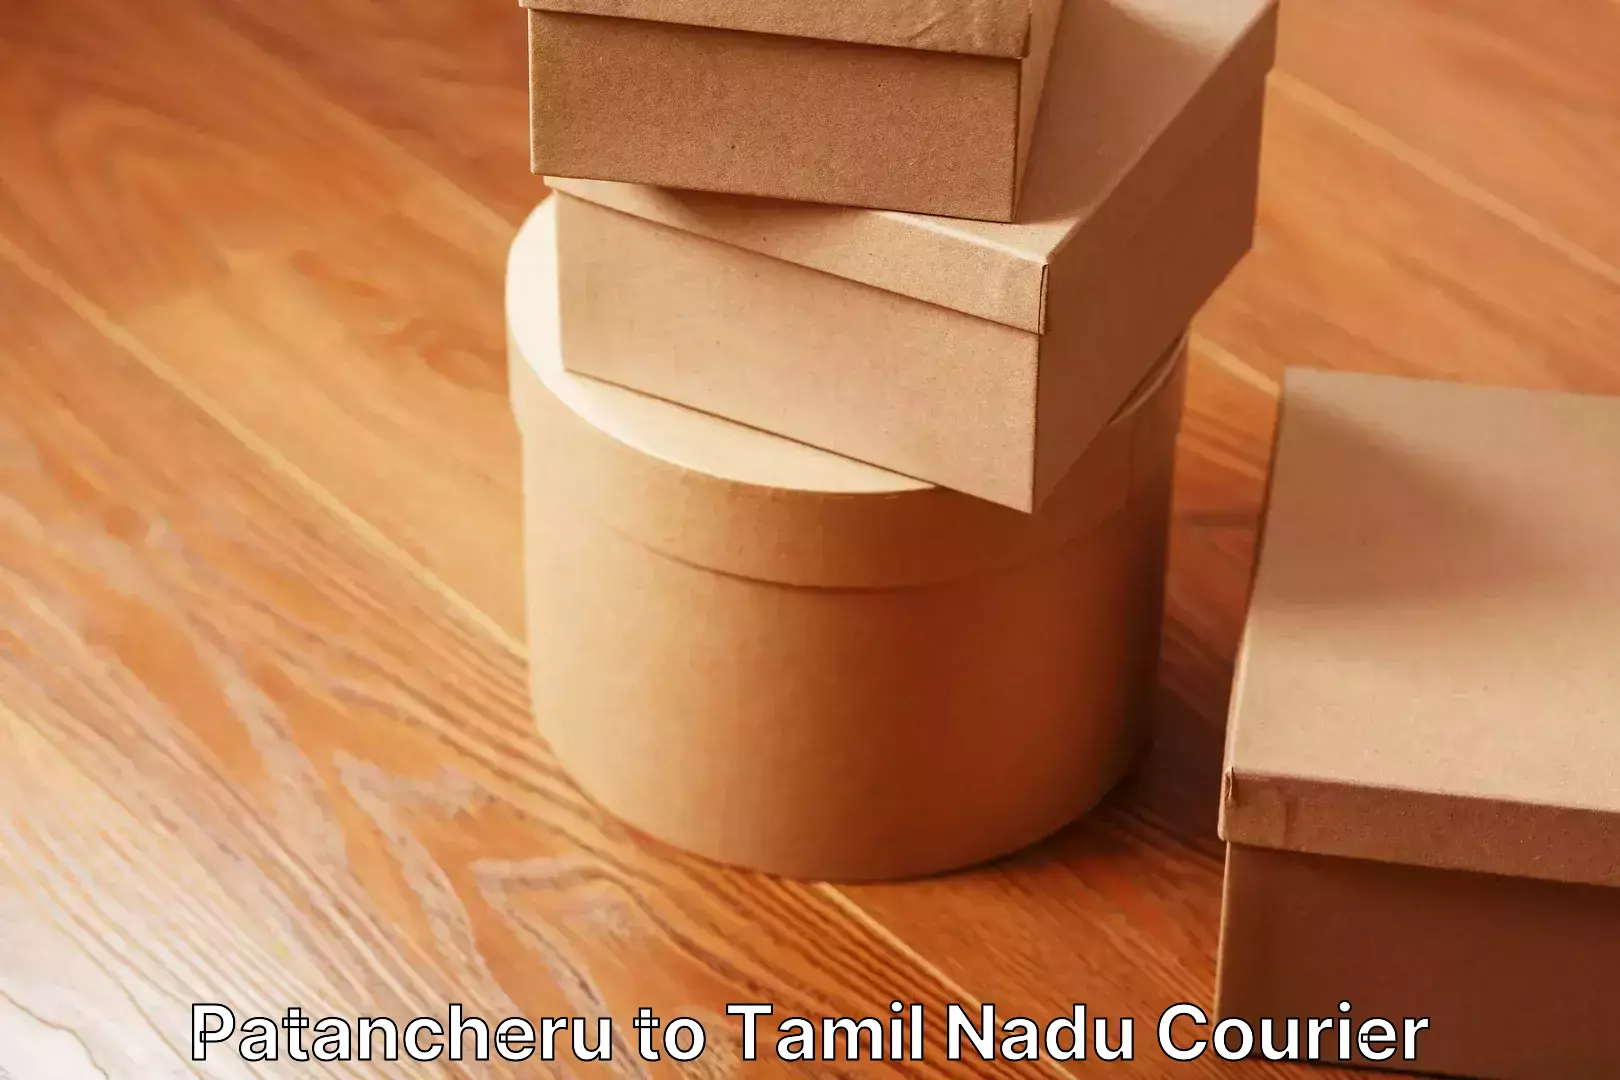 Dependable moving services in Patancheru to Tamil Nadu